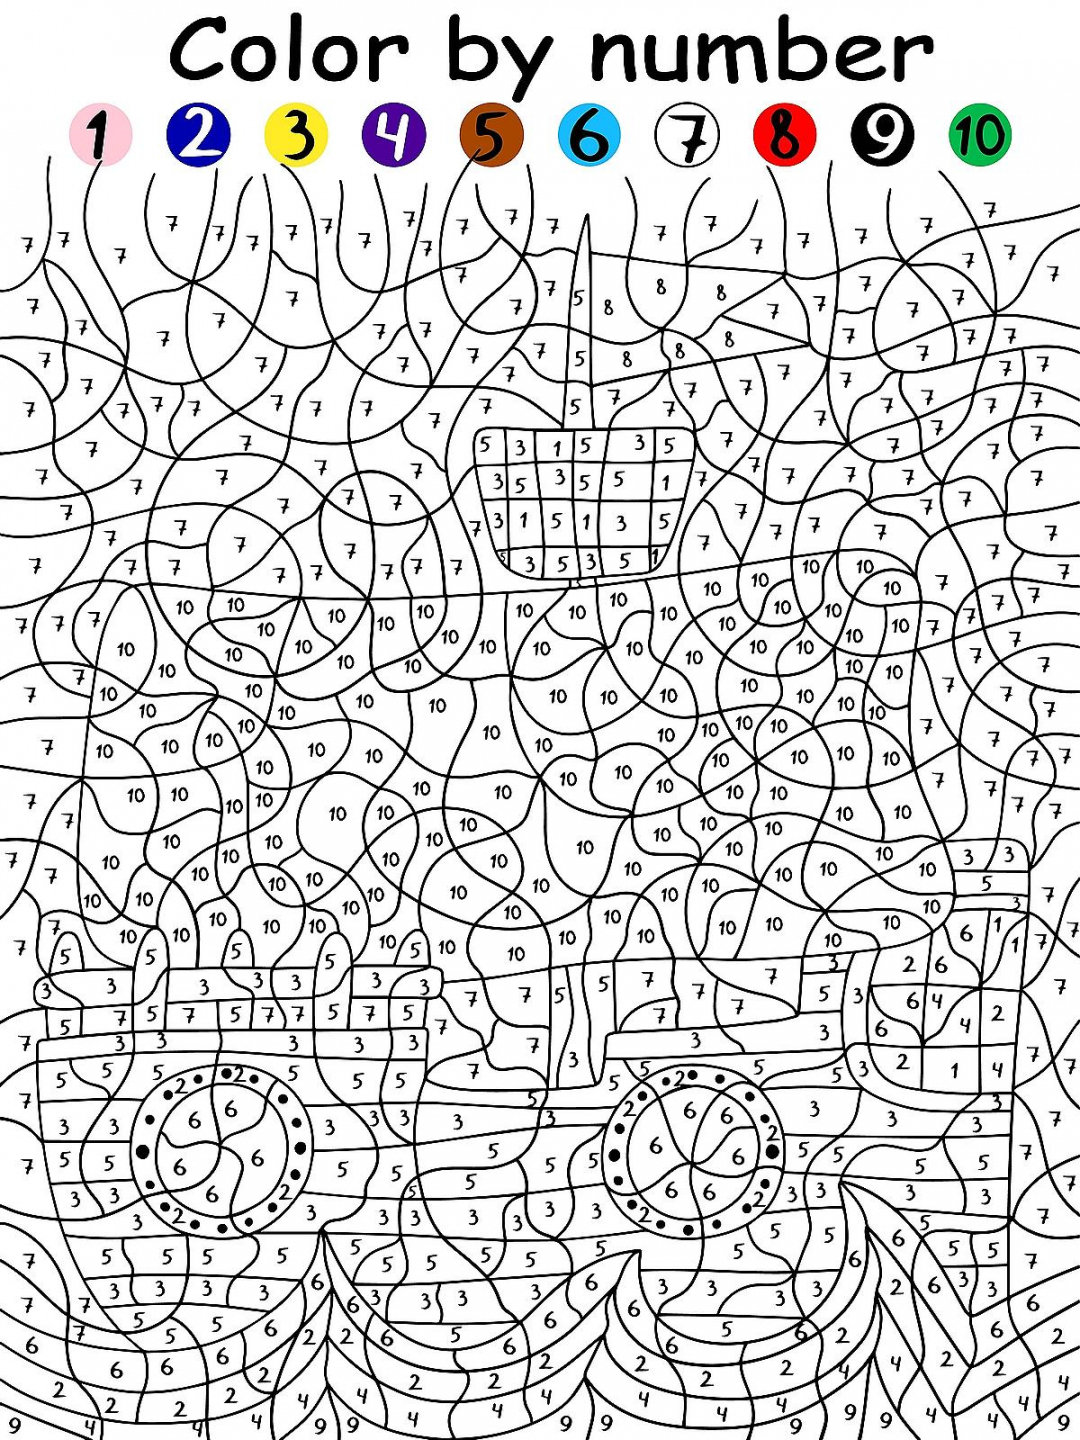 Free Color By Number Printable - Printable - Color By Numbers Activity Pages for Kids: Free & Fun Coloring